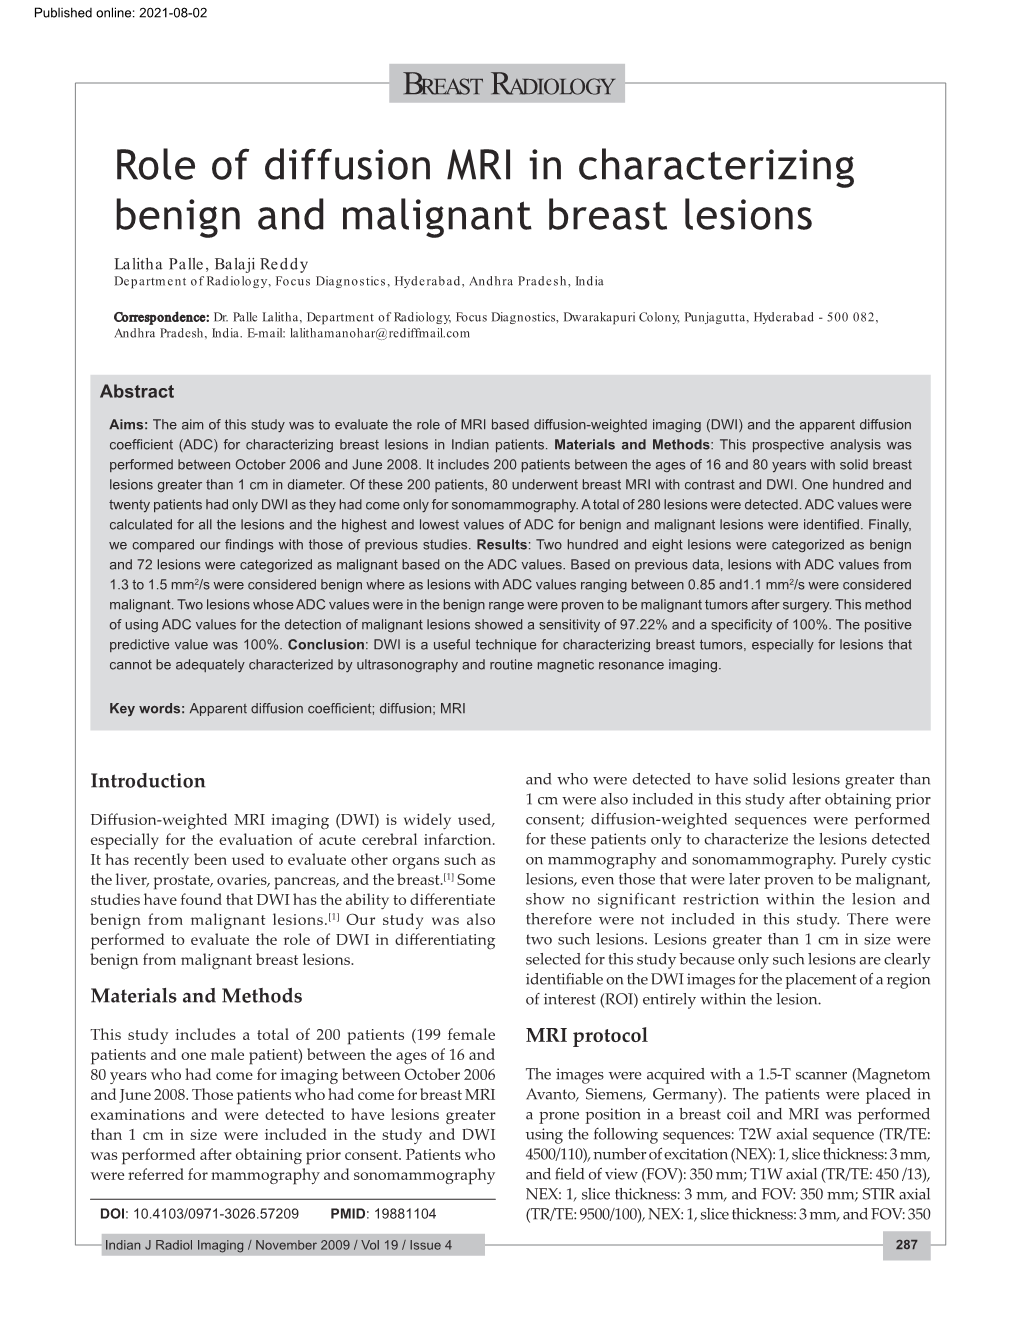 Role of Diffusion MRI in Characterizing Benign and Malignant Breast Lesions